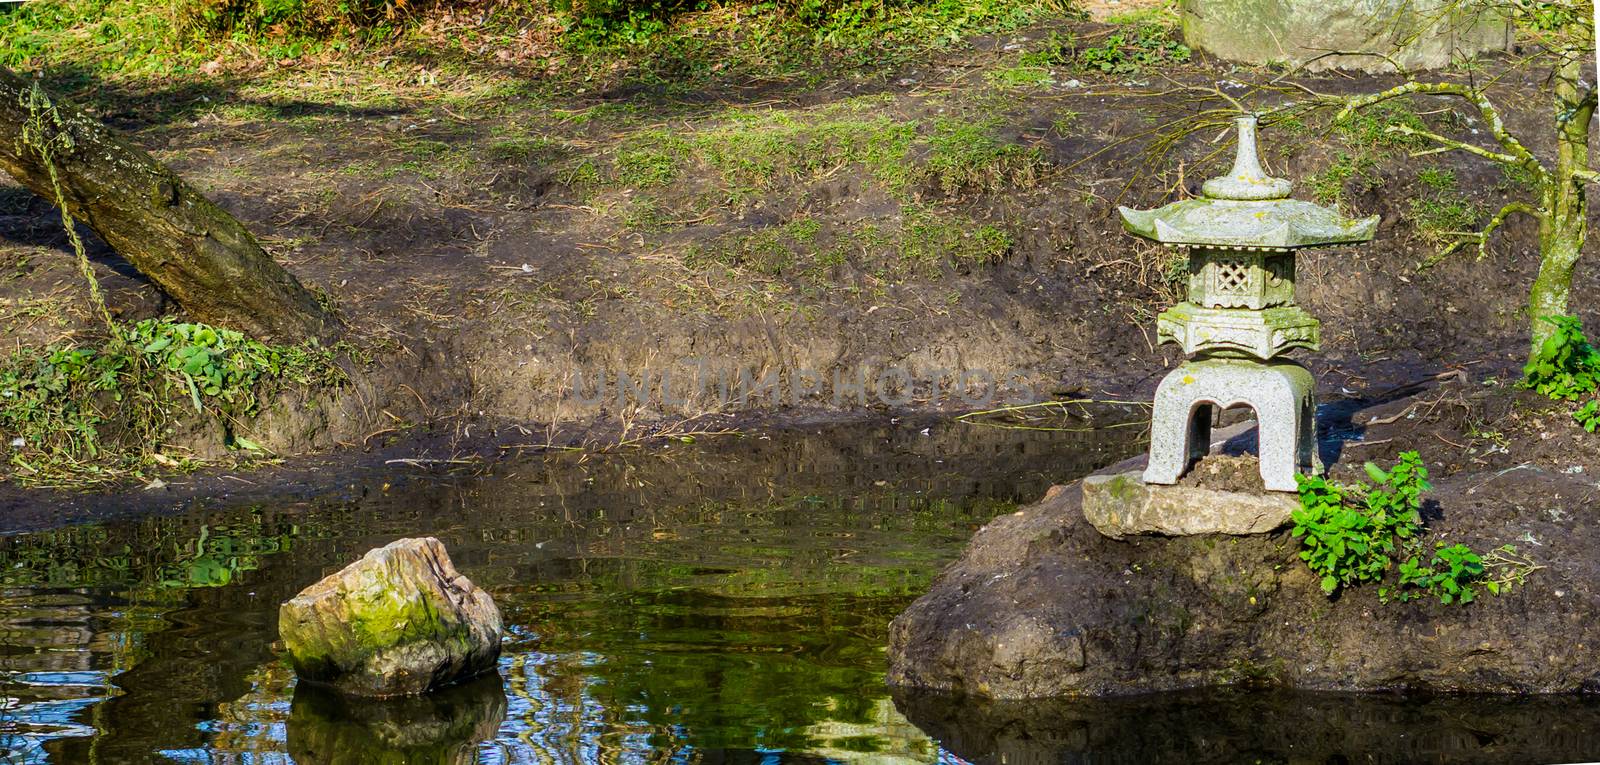 Water pond in a japanese garden with a tower sculpture, Asian garden background by charlottebleijenberg